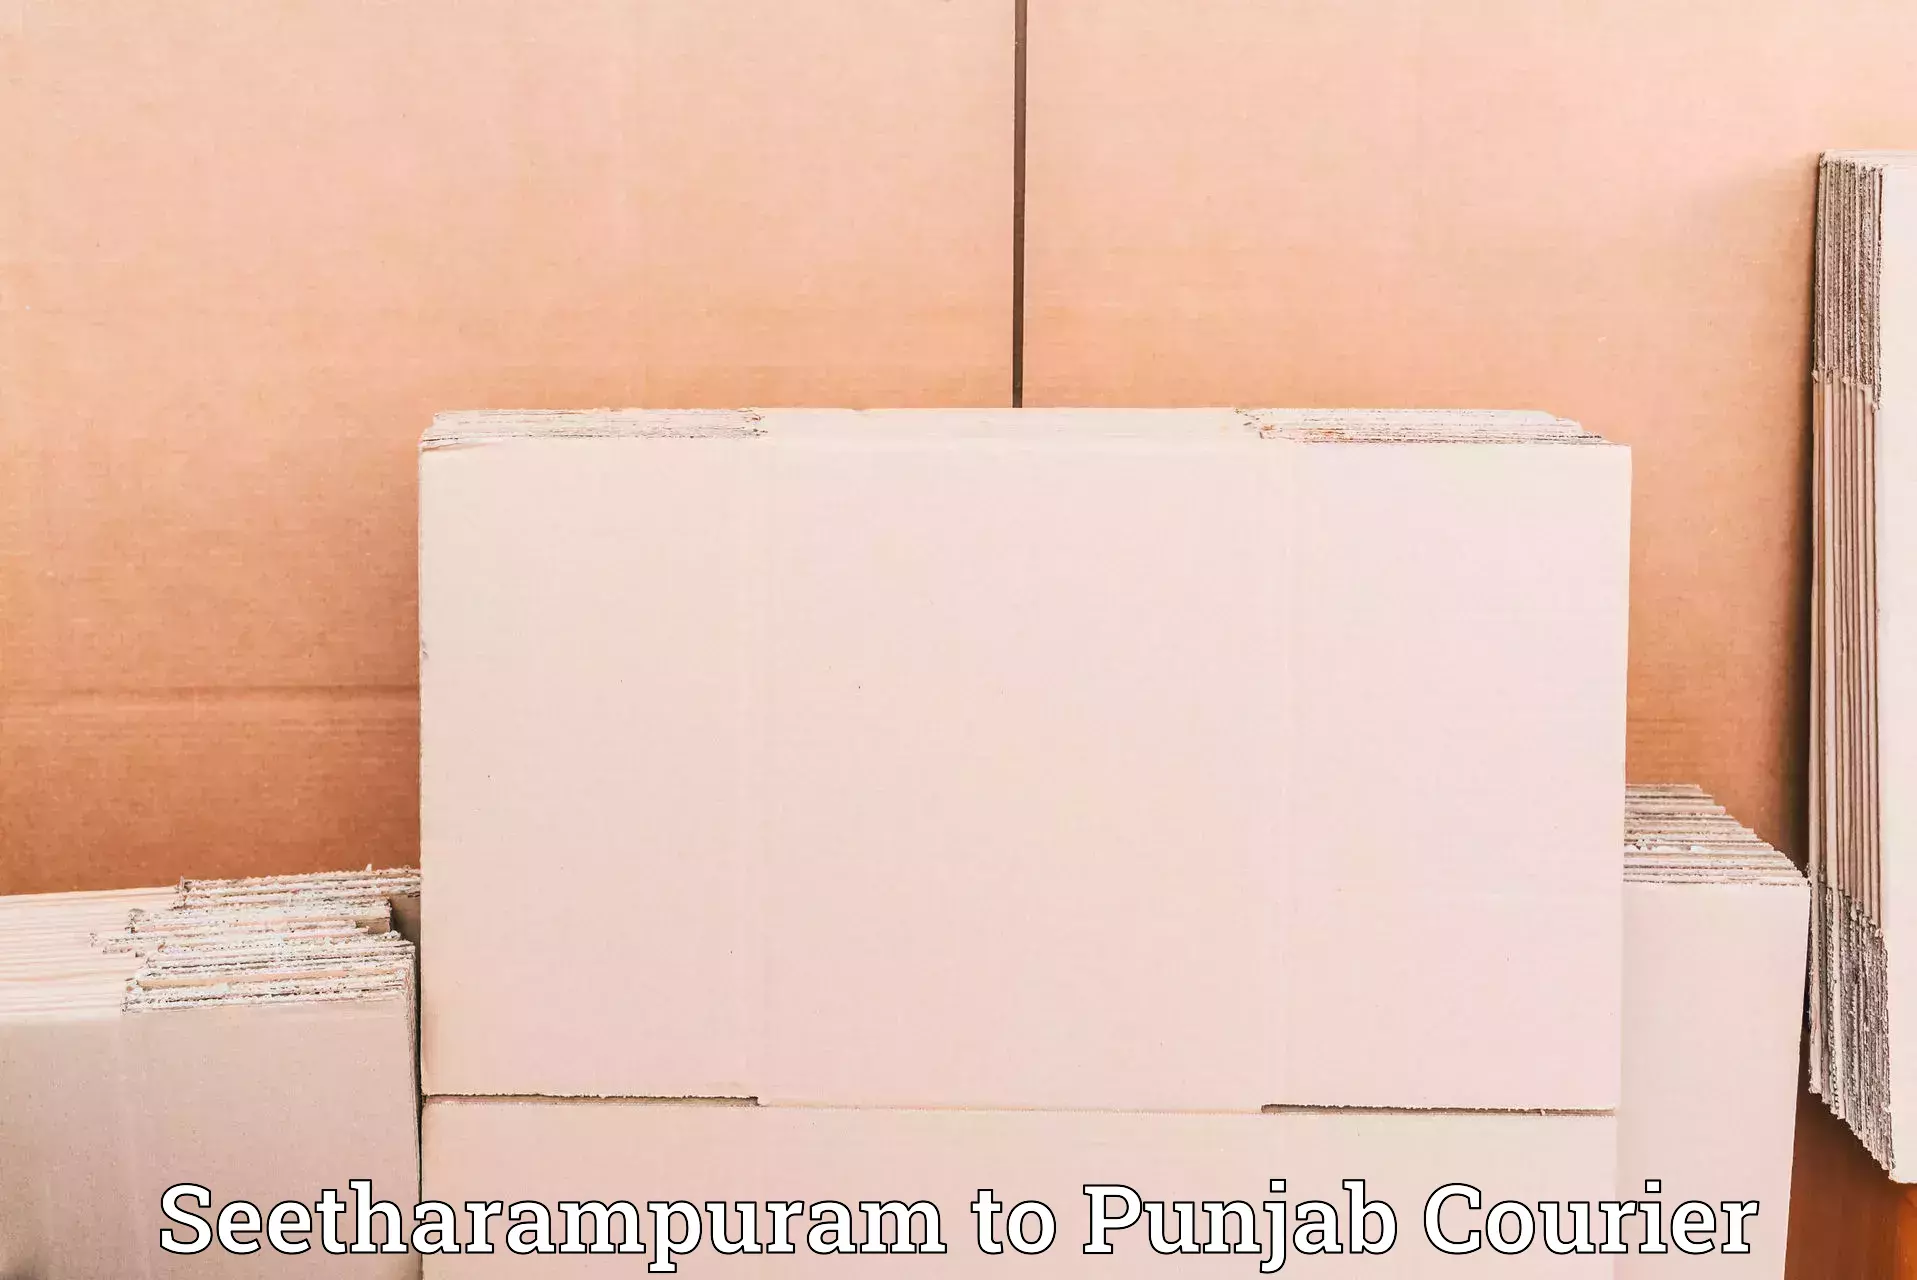 Easy access courier services in Seetharampuram to Punjab